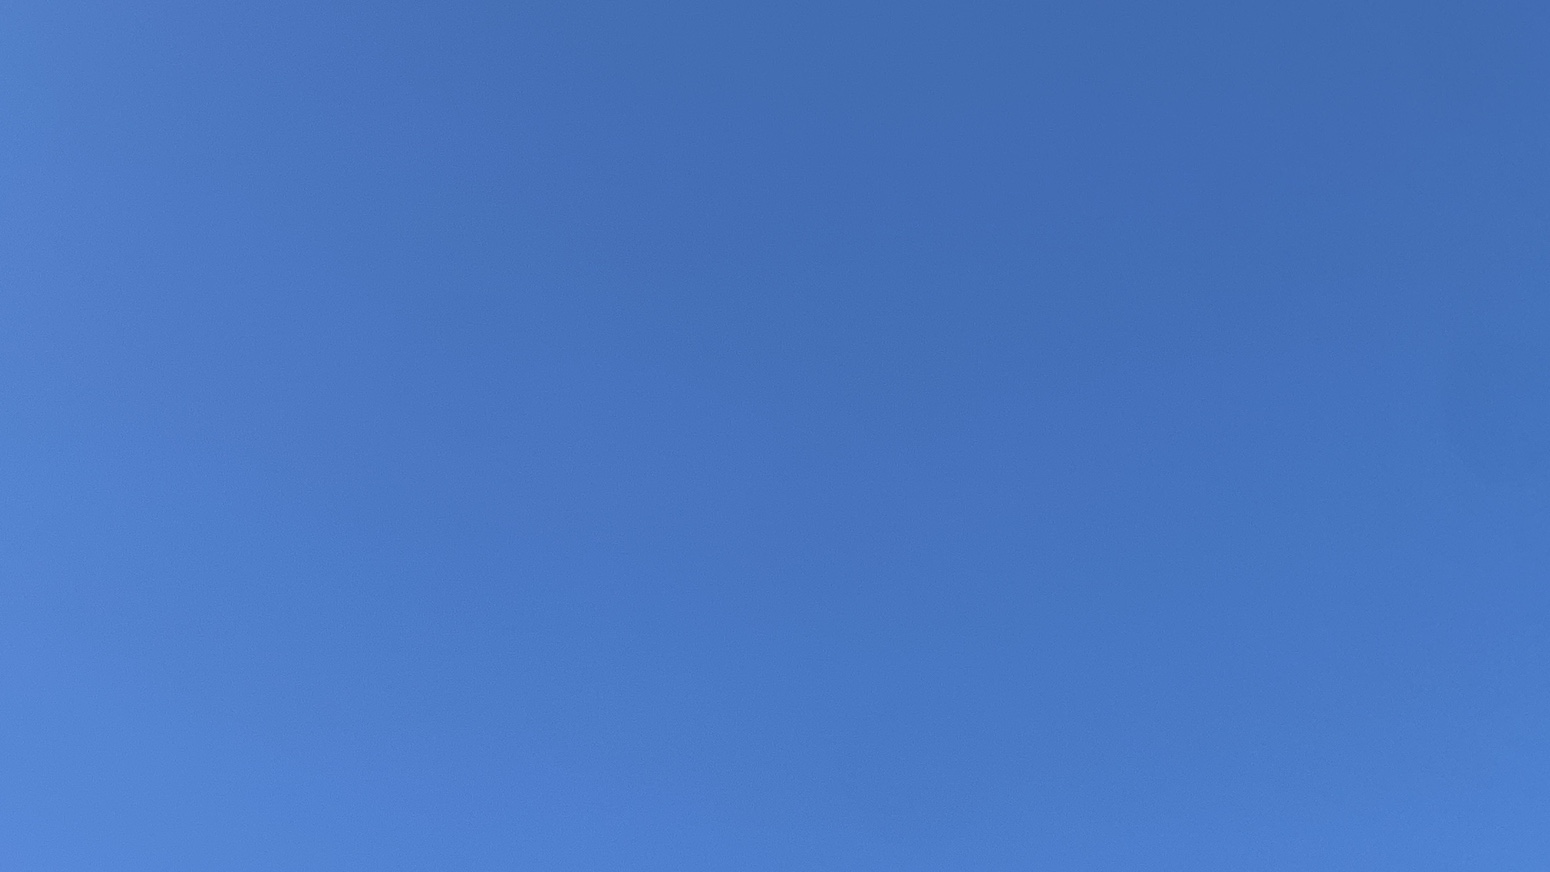 Completely blue sky